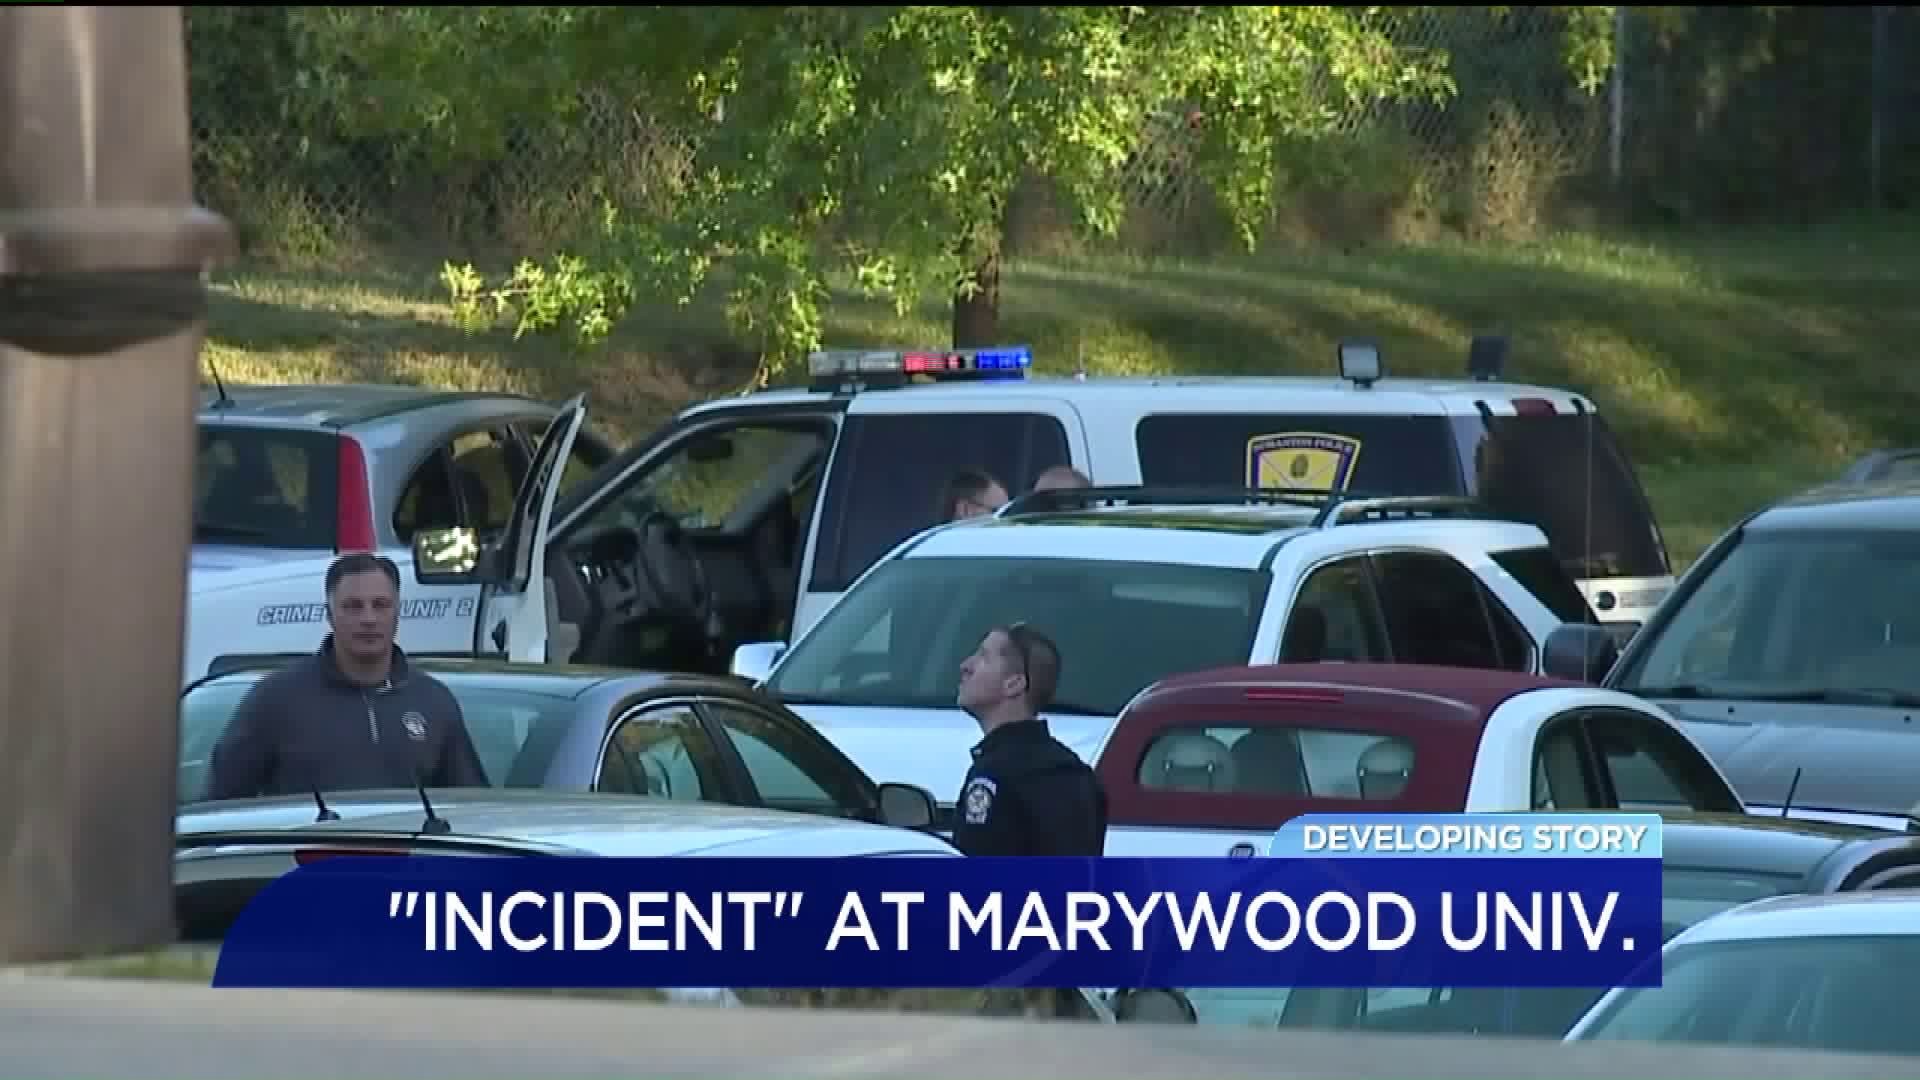 Reports of Person with Weapon at Marywood University